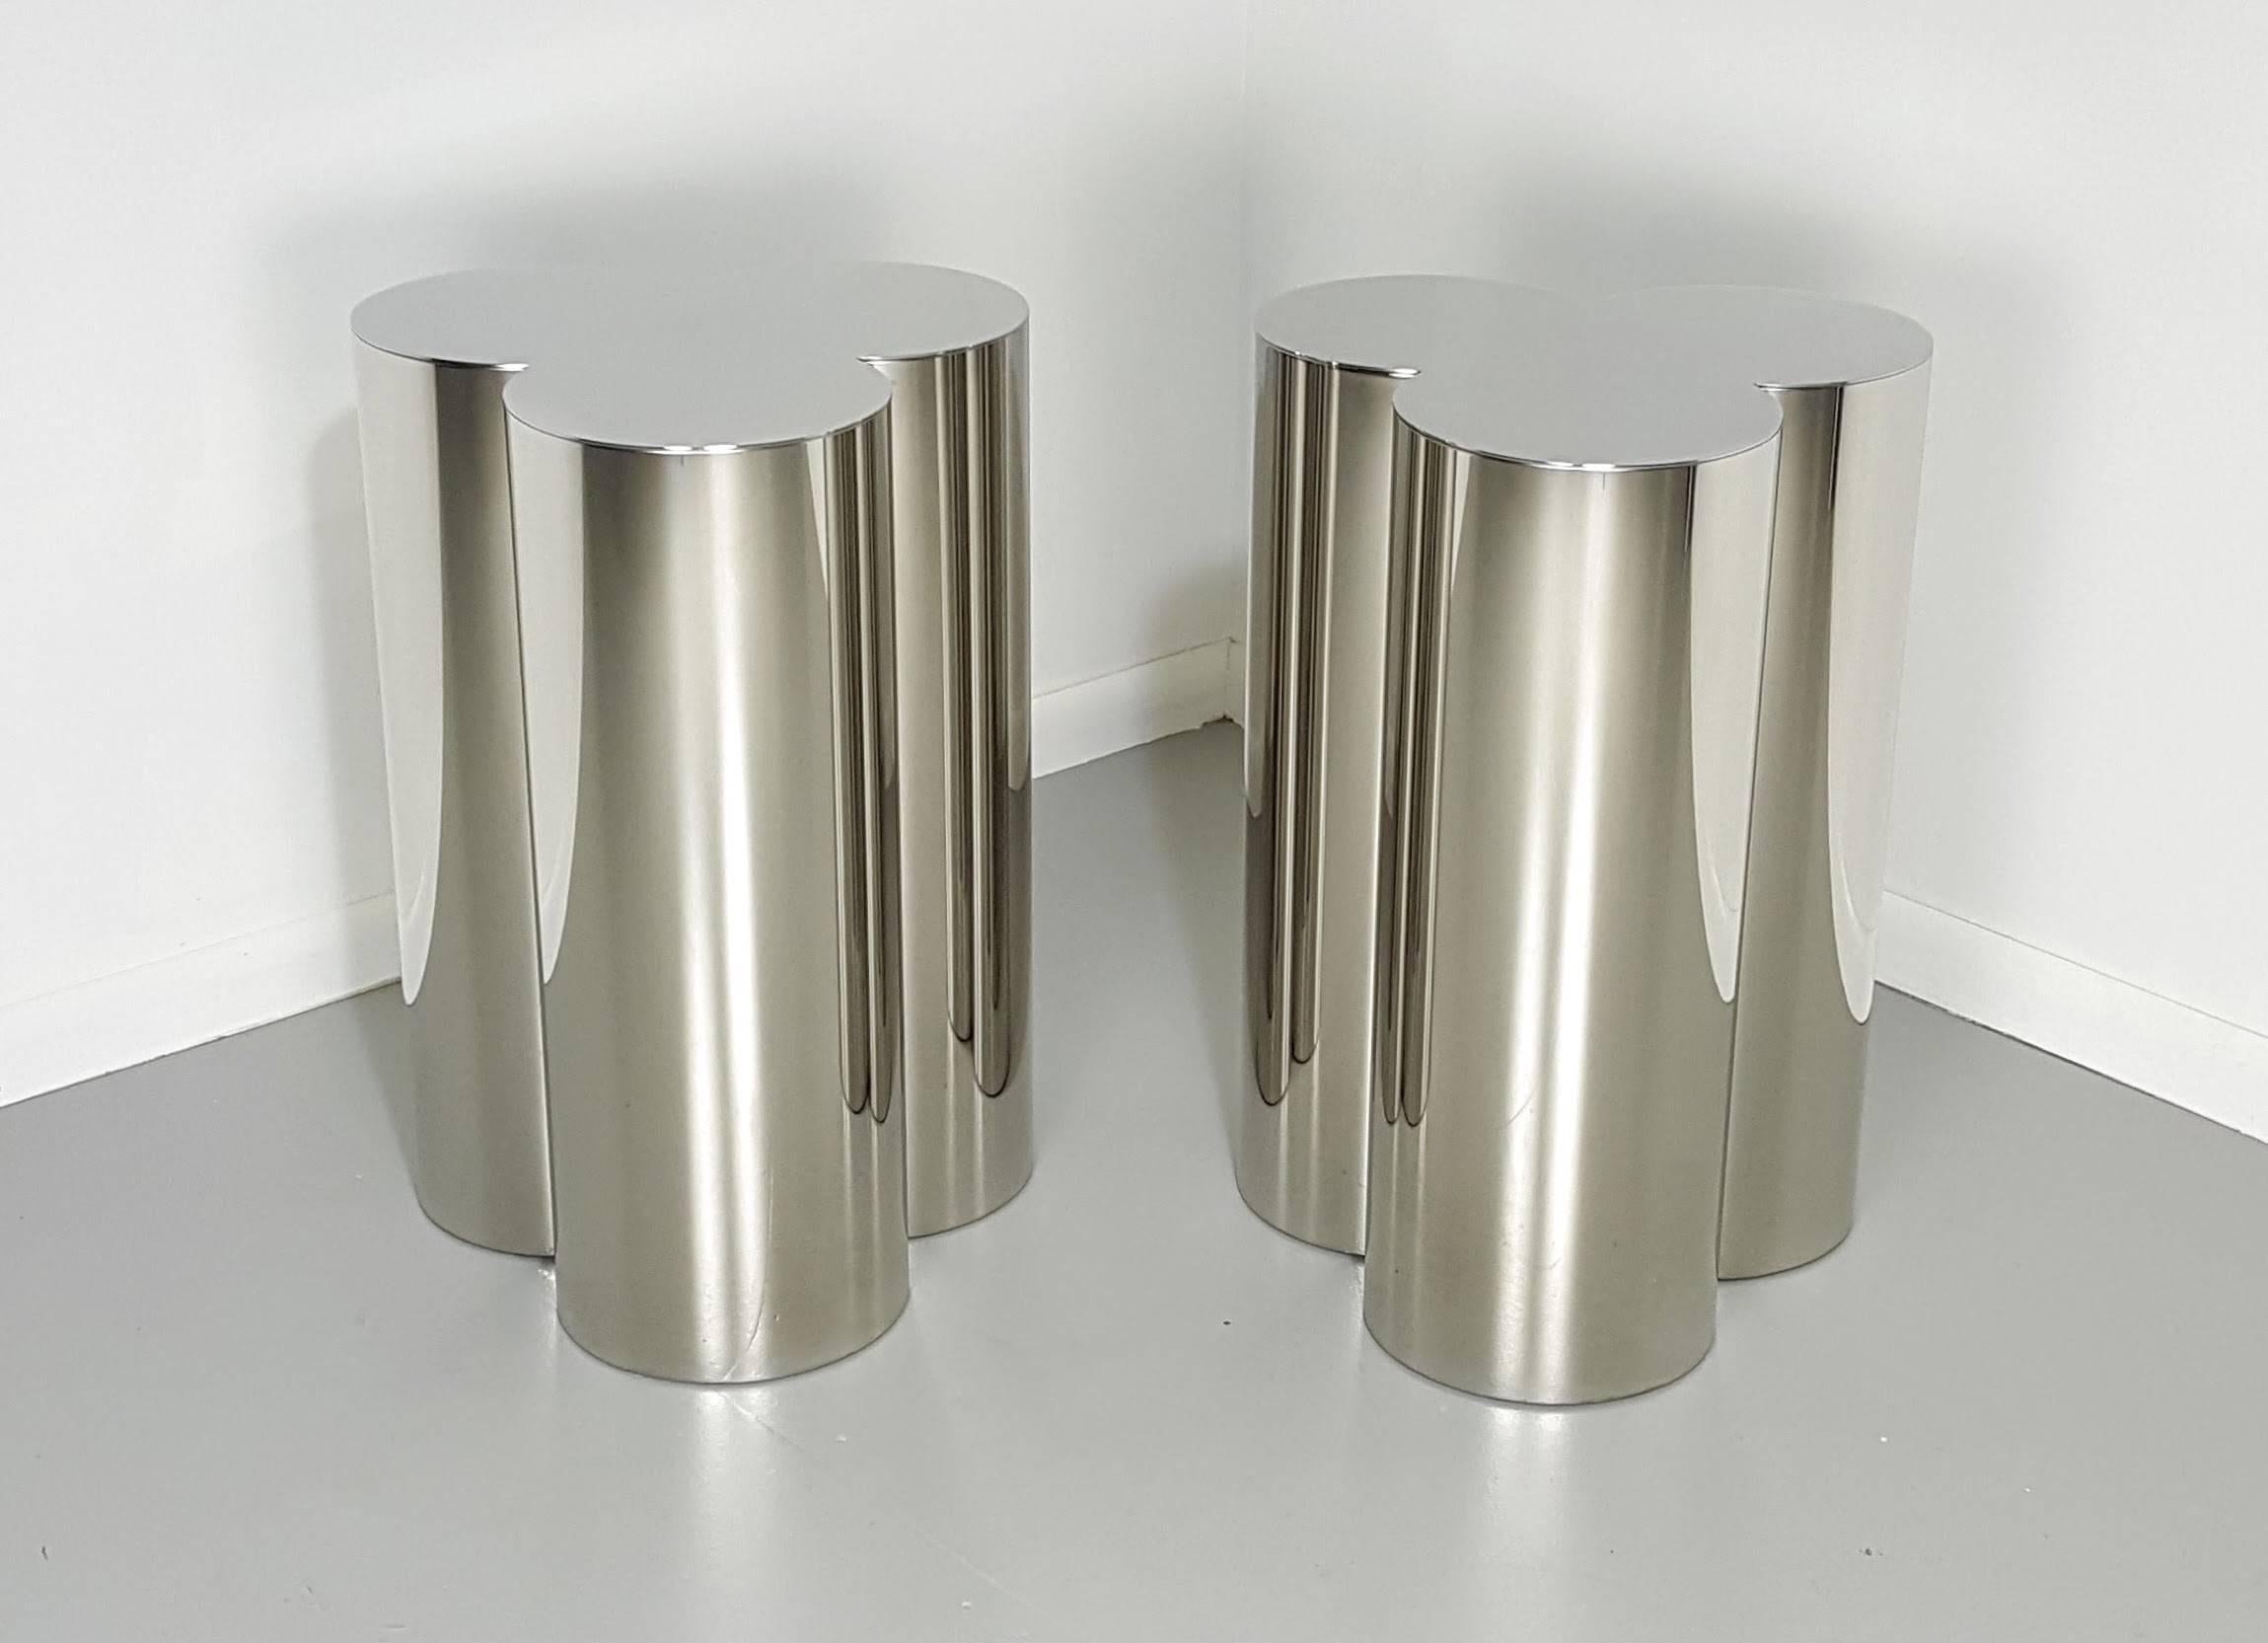 Trefoil dining tables base pedestals in mirror stainless steel. The finish appears as chrome. This is a custom-made product that is also available in polished brass. These pedestals are Industrial quality and designed to support large glass, wood,